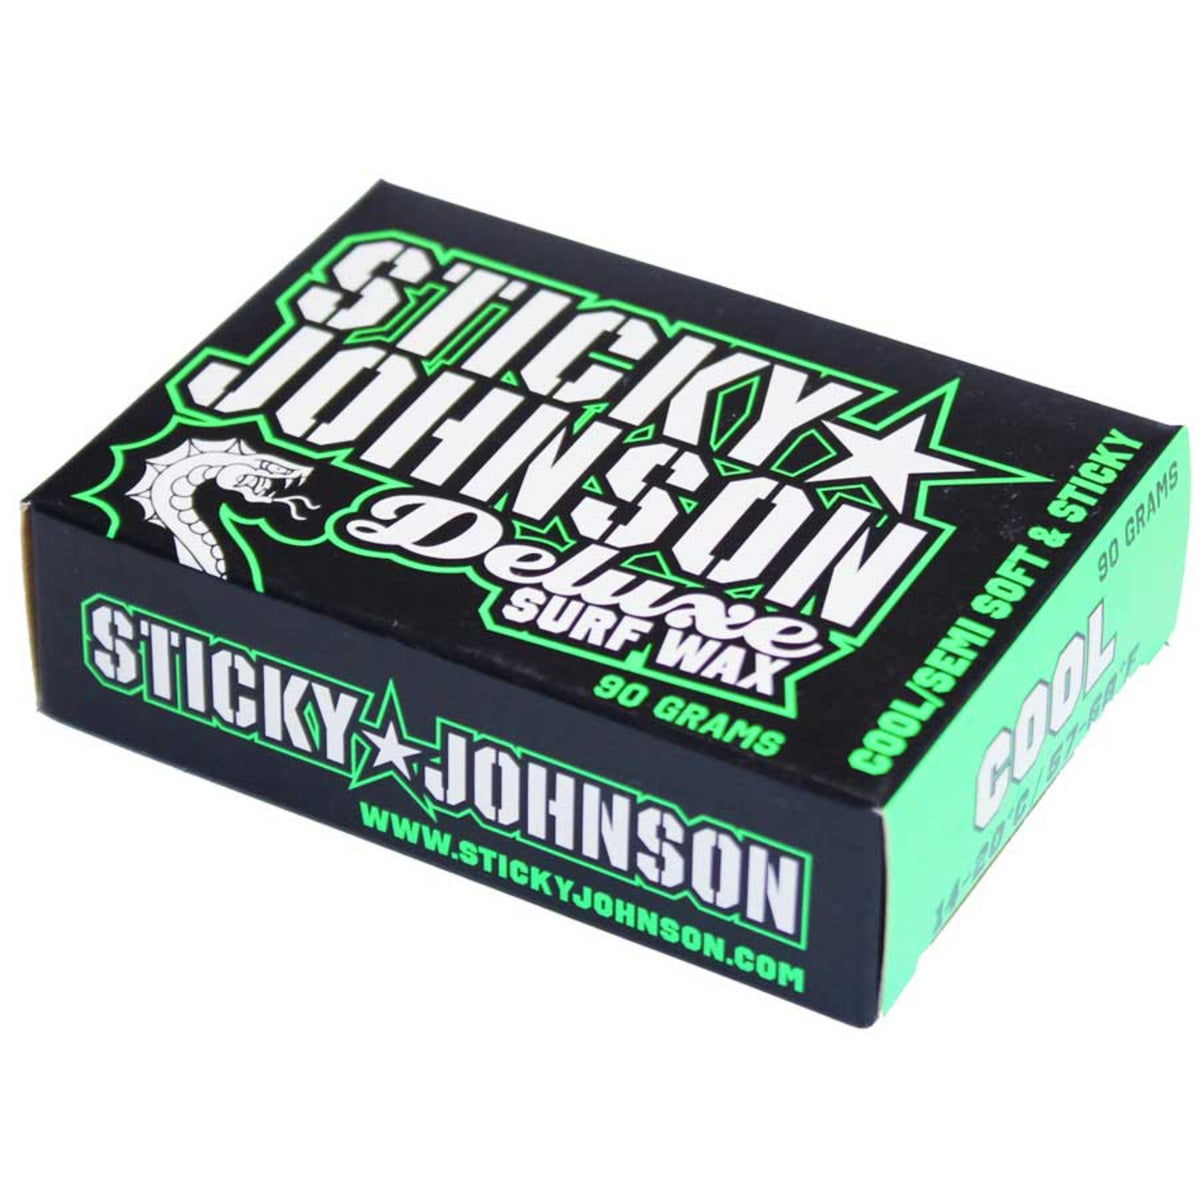 STICK_JOHNSON_DELUXE_WAX_COOL_01